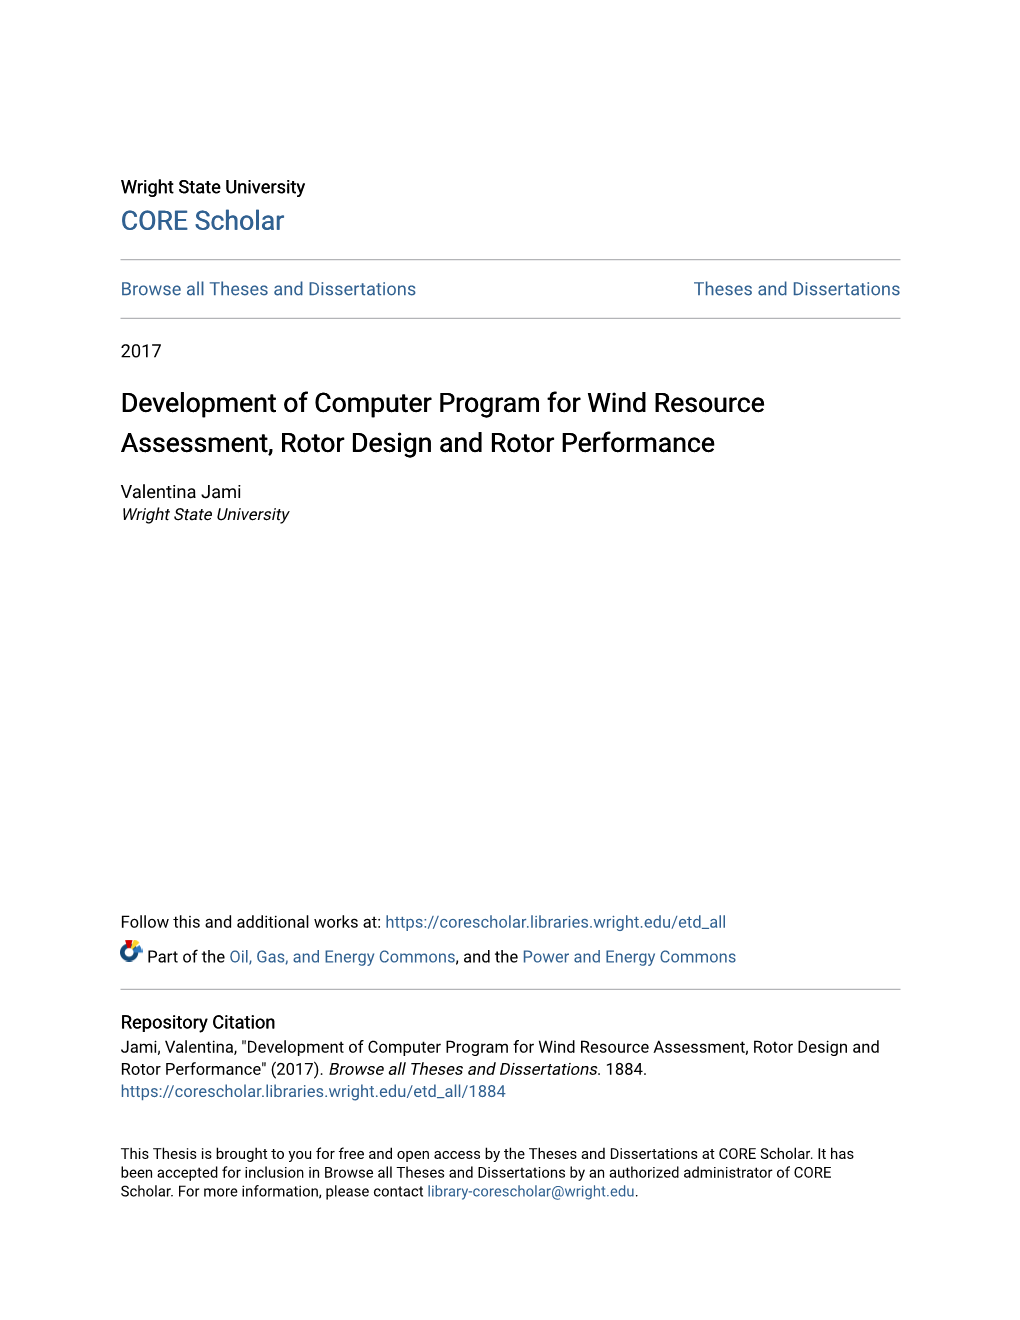 Development of Computer Program for Wind Resource Assessment, Rotor Design and Rotor Performance